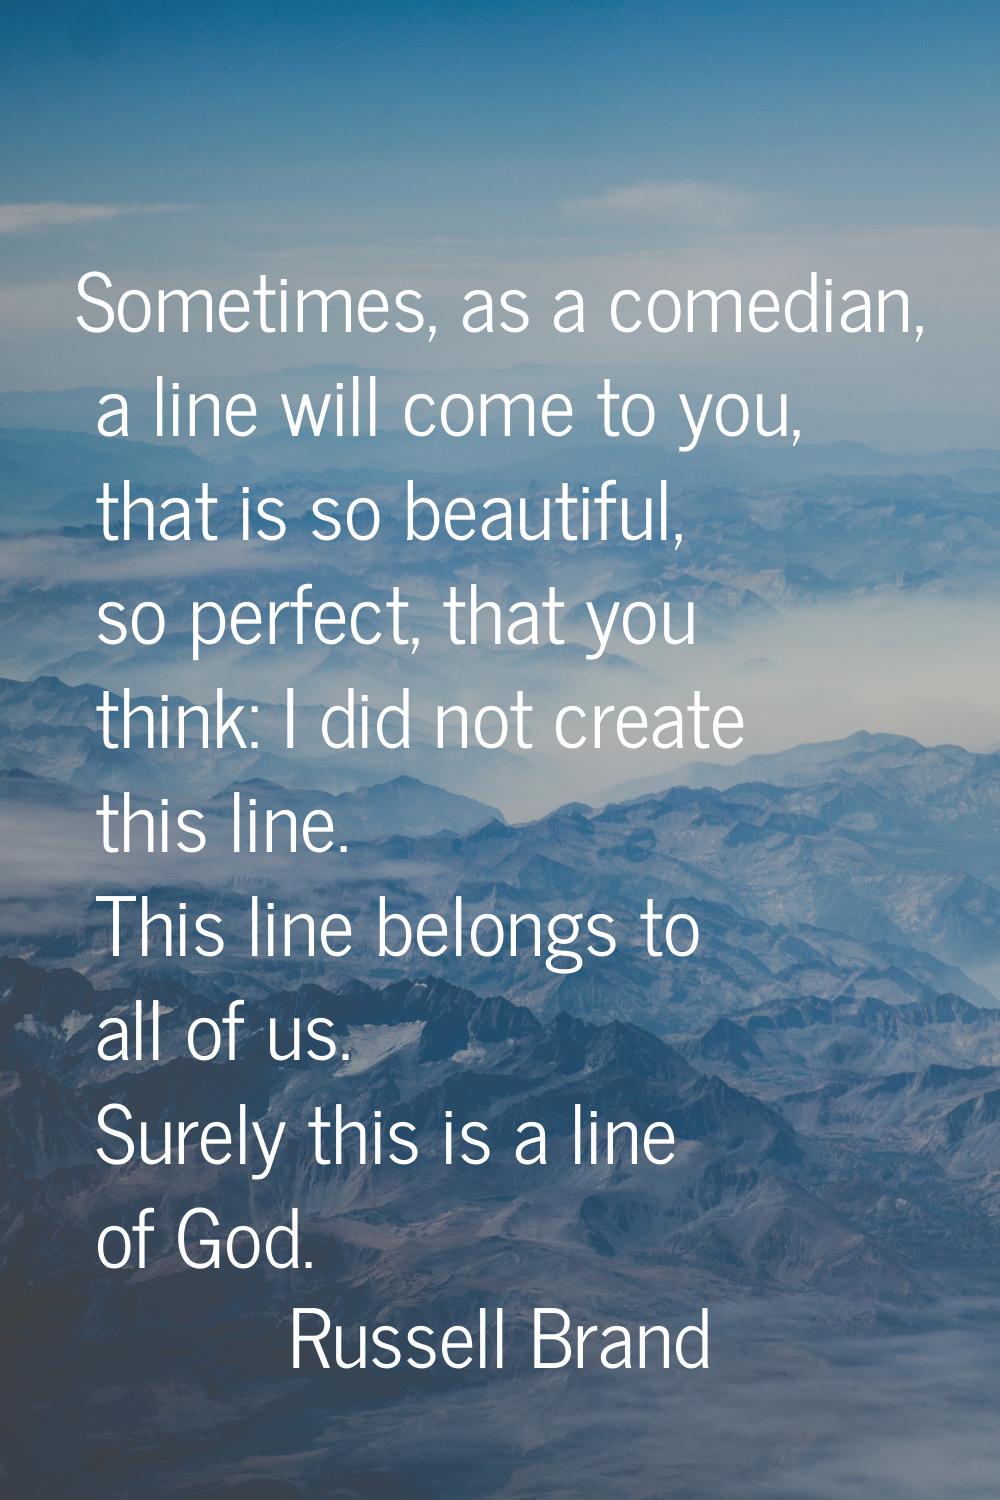 Sometimes, as a comedian, a line will come to you, that is so beautiful, so perfect, that you think